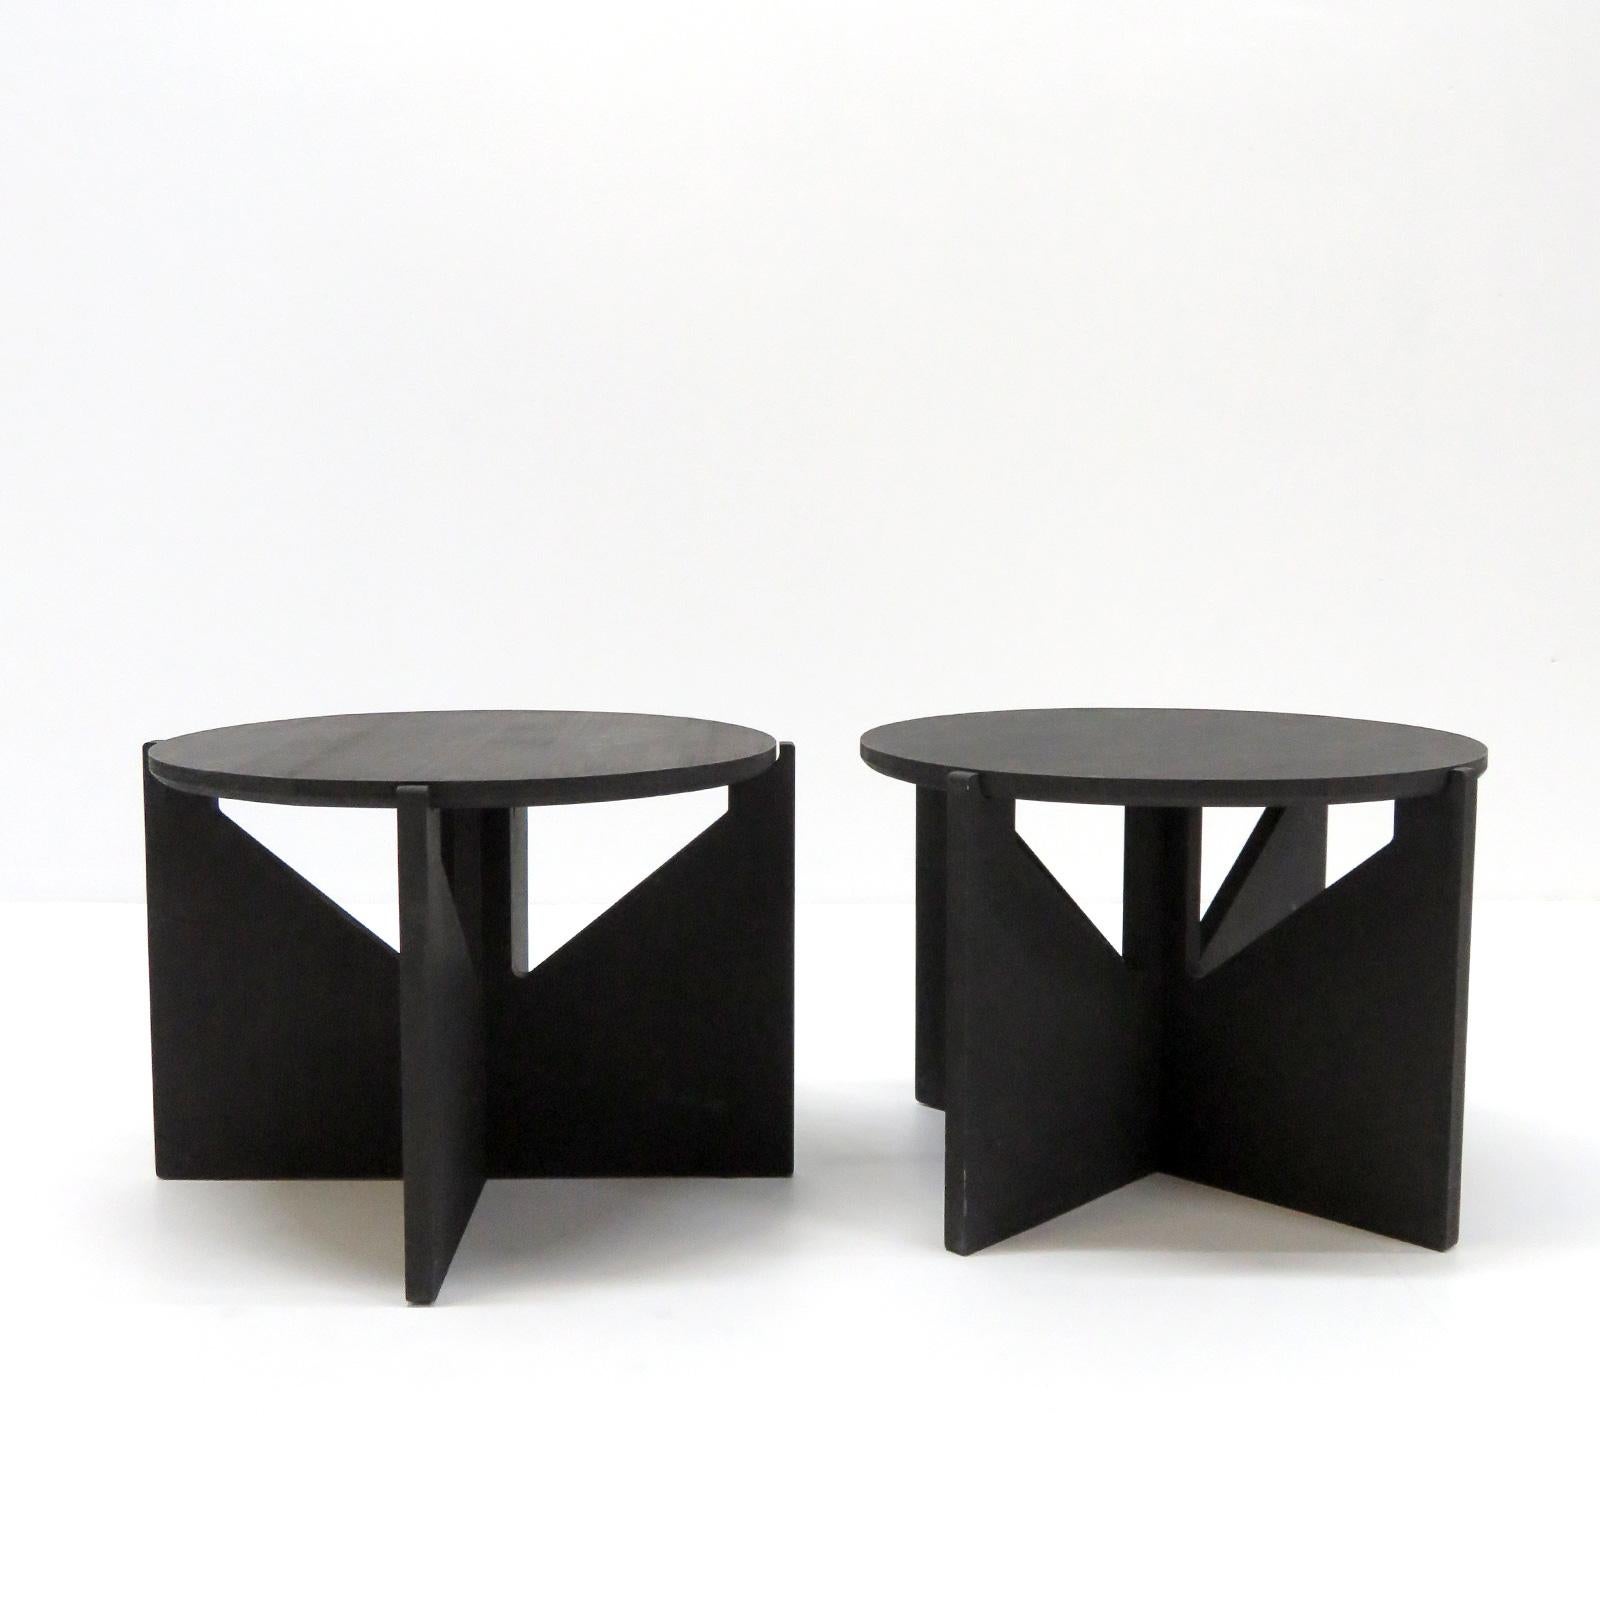 Painted Kristina Dam Side Tables